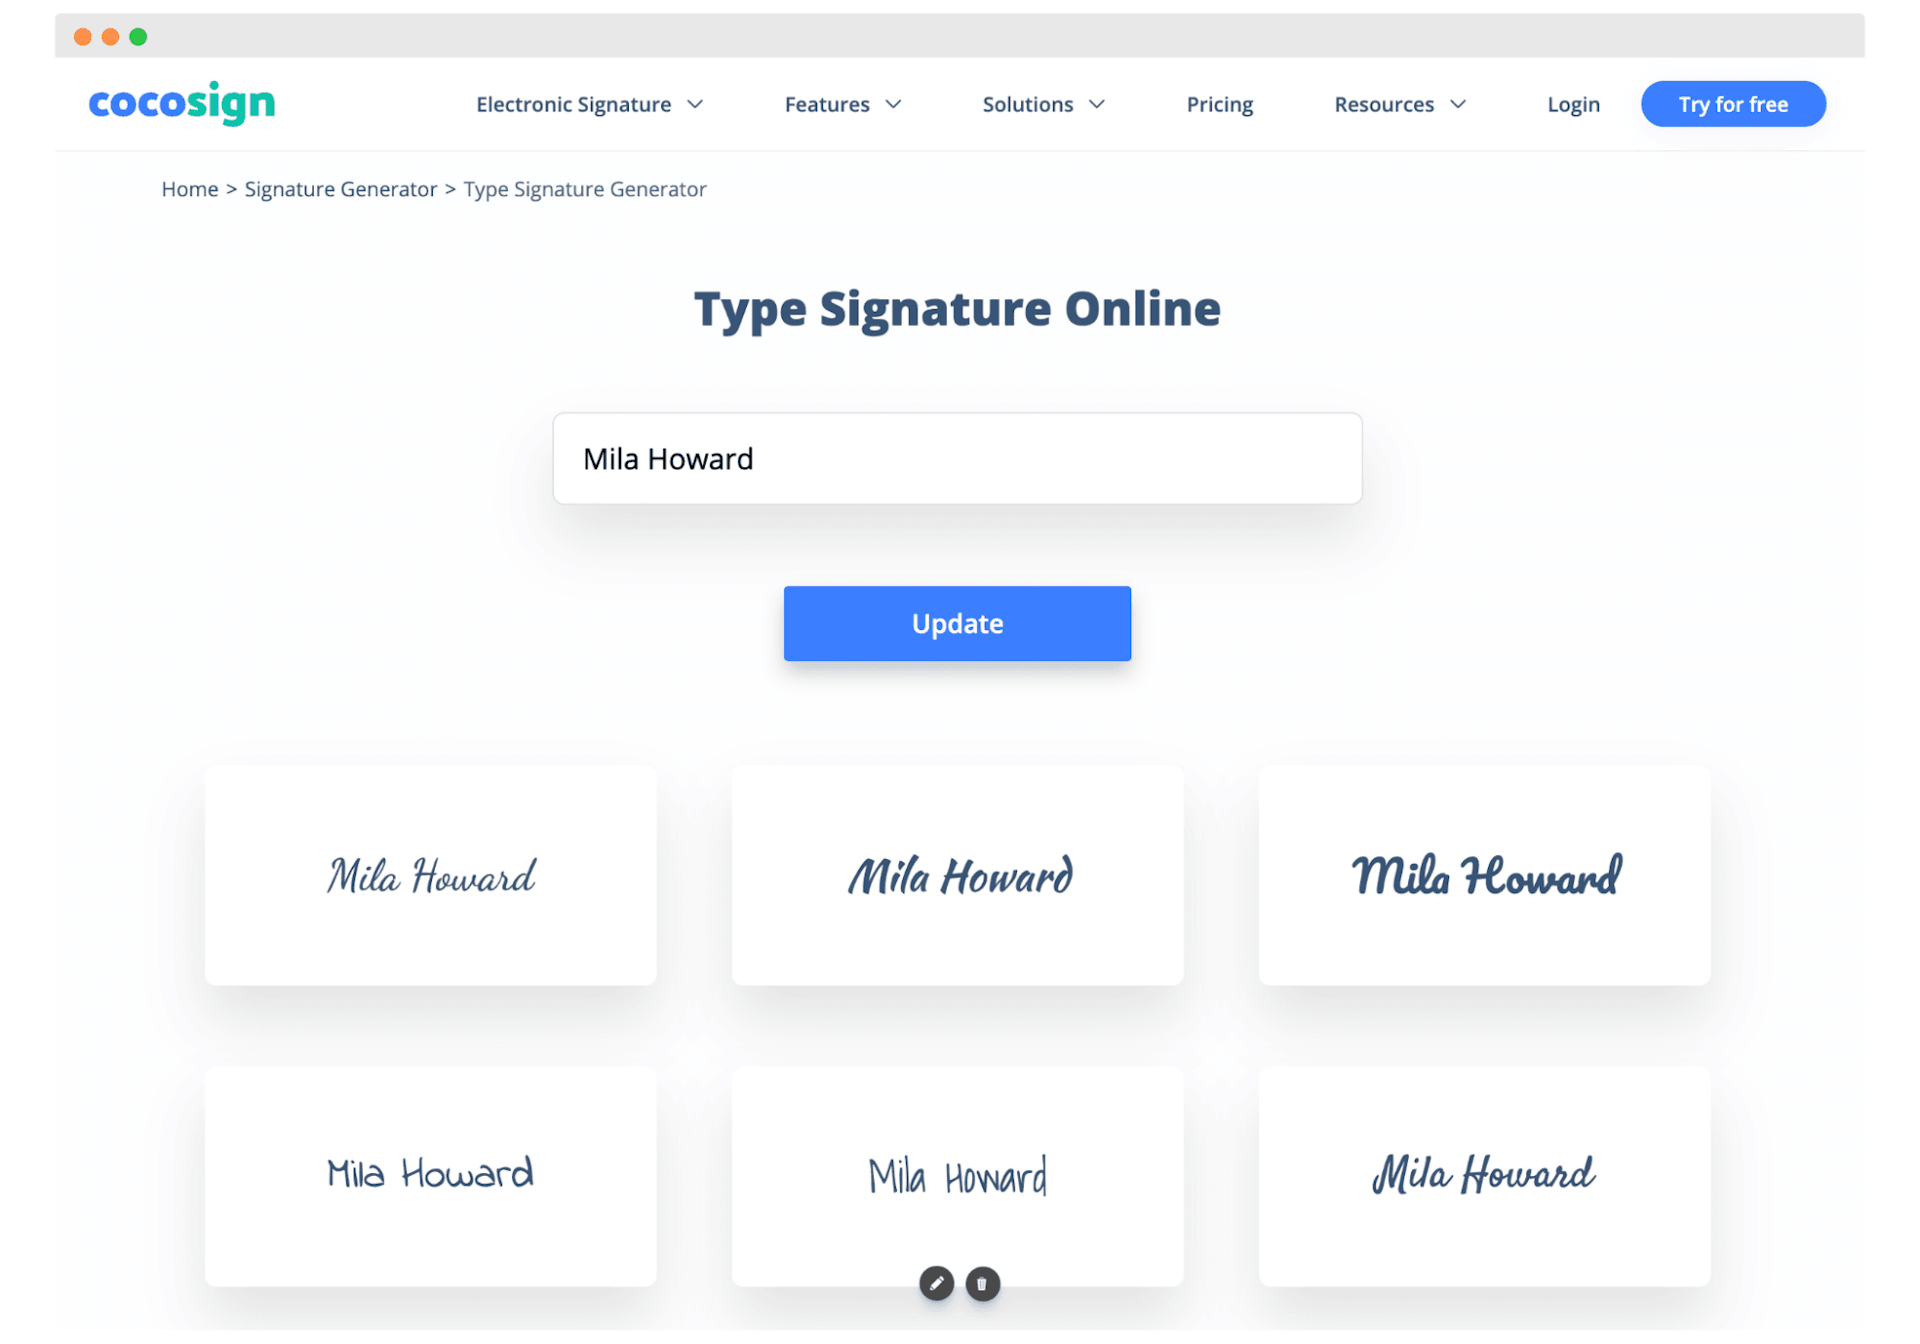 CocoSign as one of the best option to create signatures.